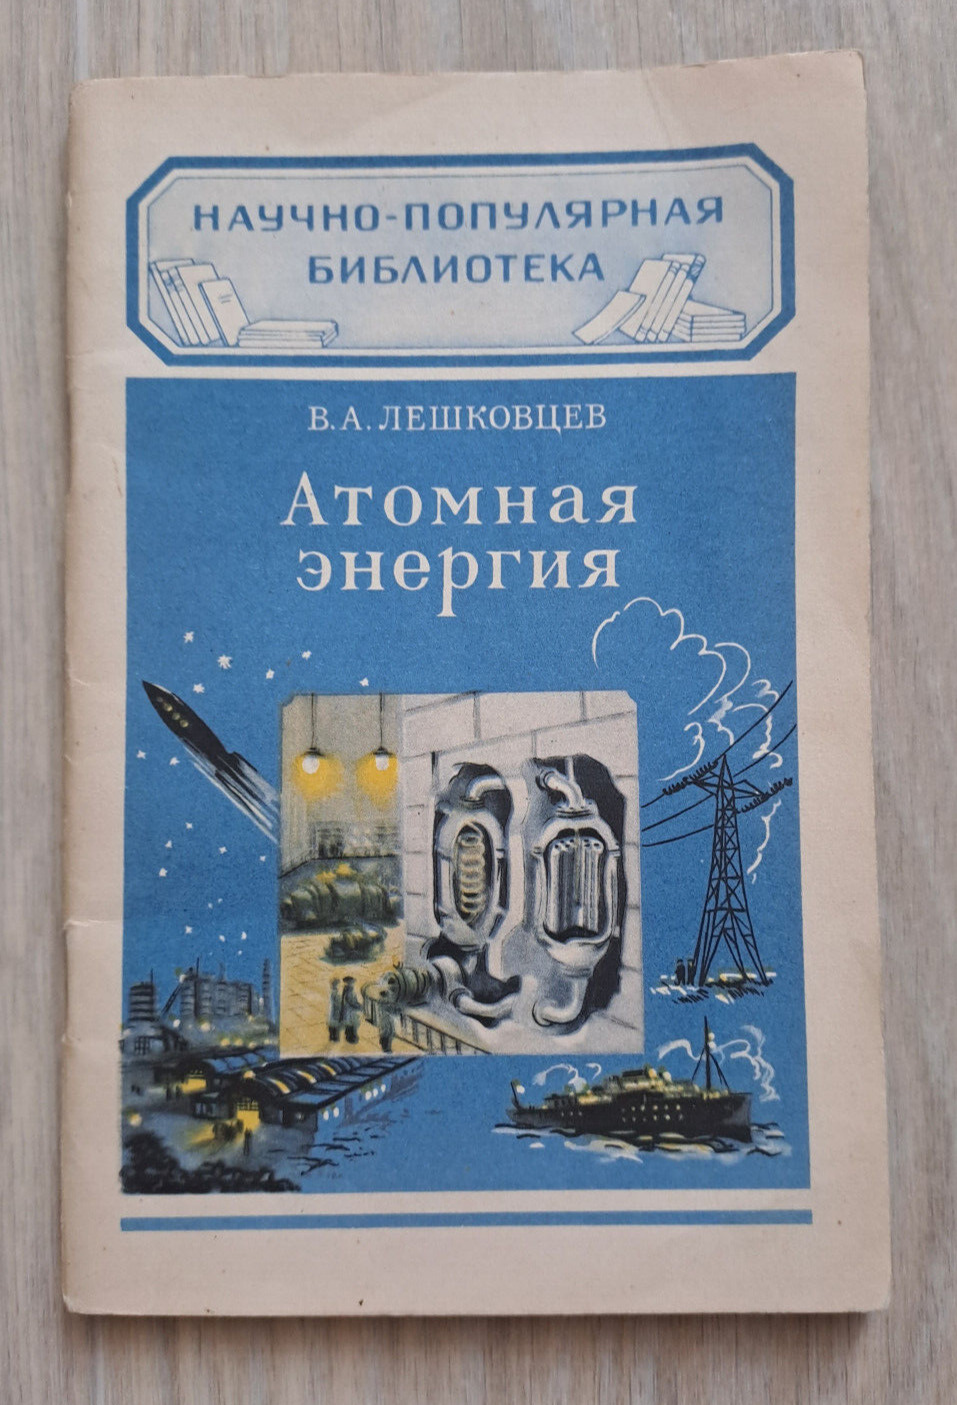 1955 Atomic Energy Nuclear Space Rocket popular science library Russian book